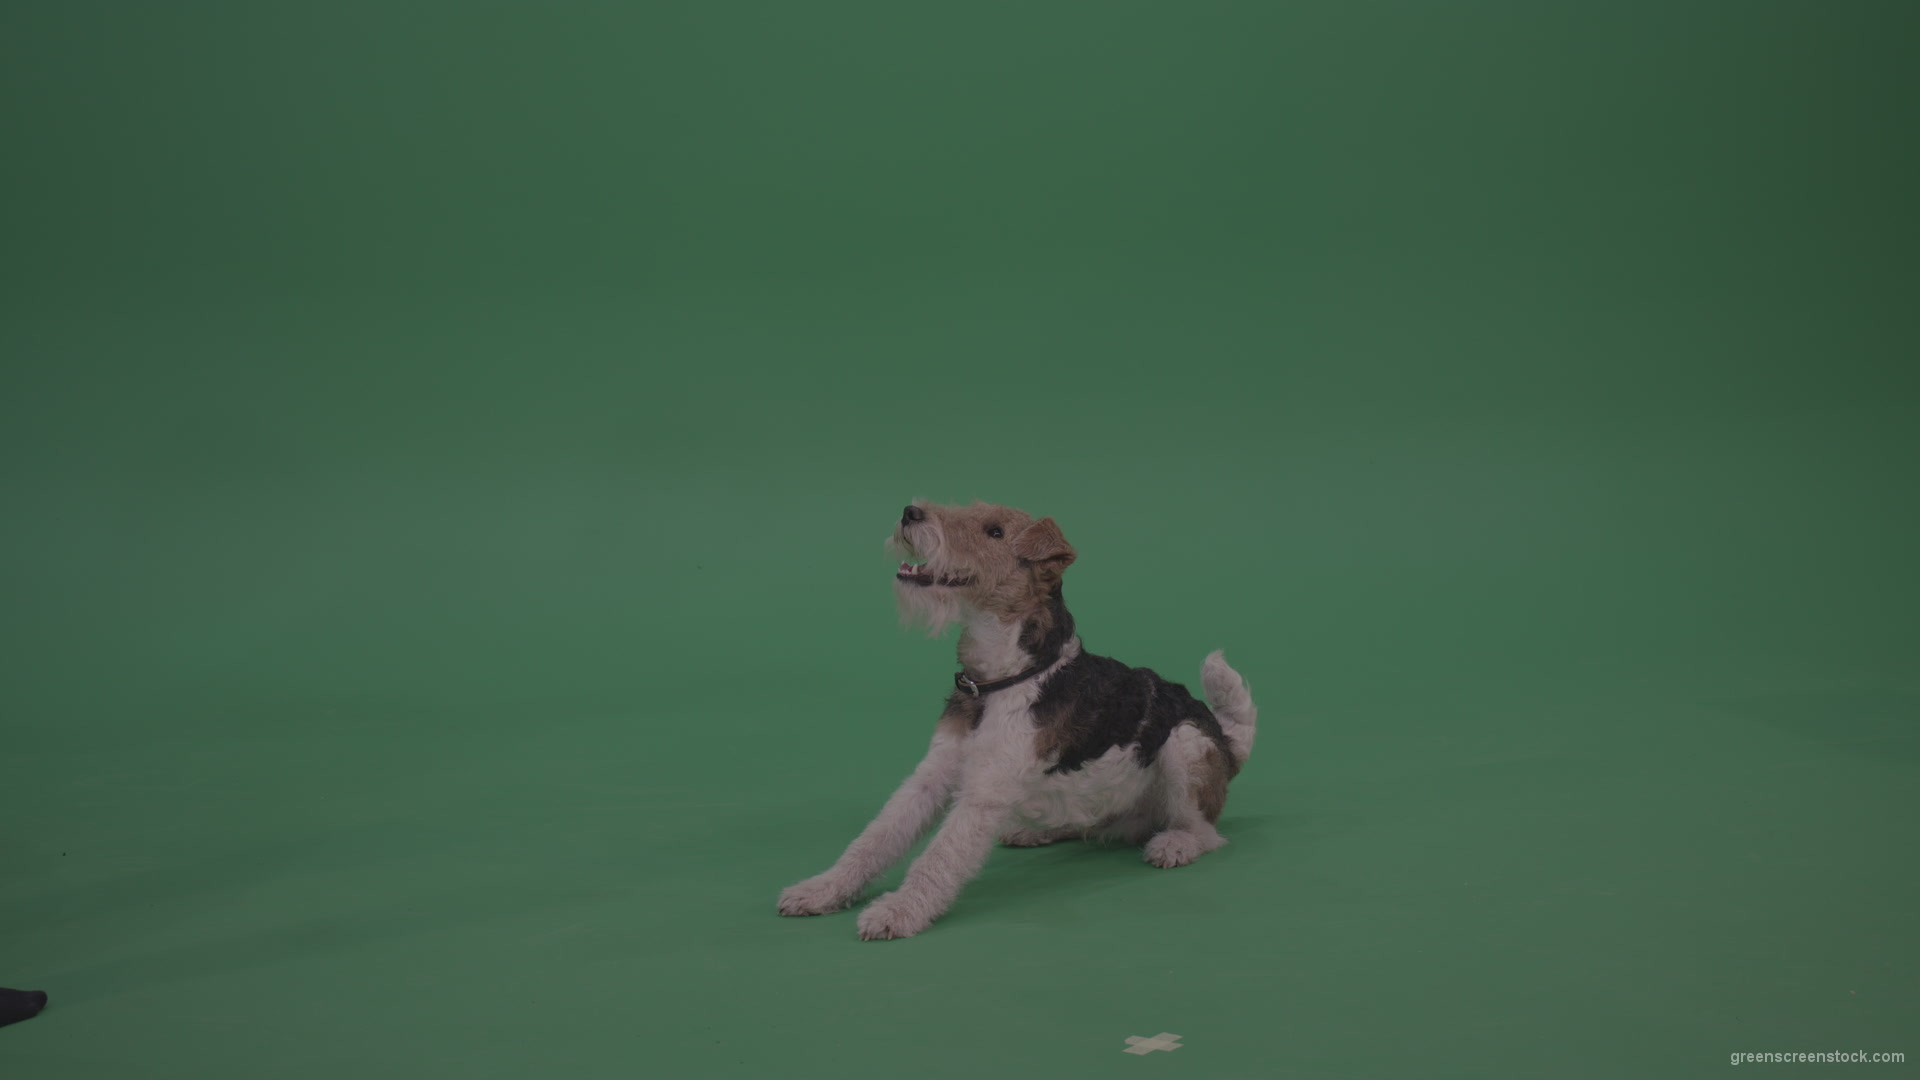 Wire-Fox-Terrier-Standing-On-Back-Feet-Ann-Serving-Then-Lies-Down-On-The-Ground-On-Green-Screen-Wall-Background_008 Green Screen Stock